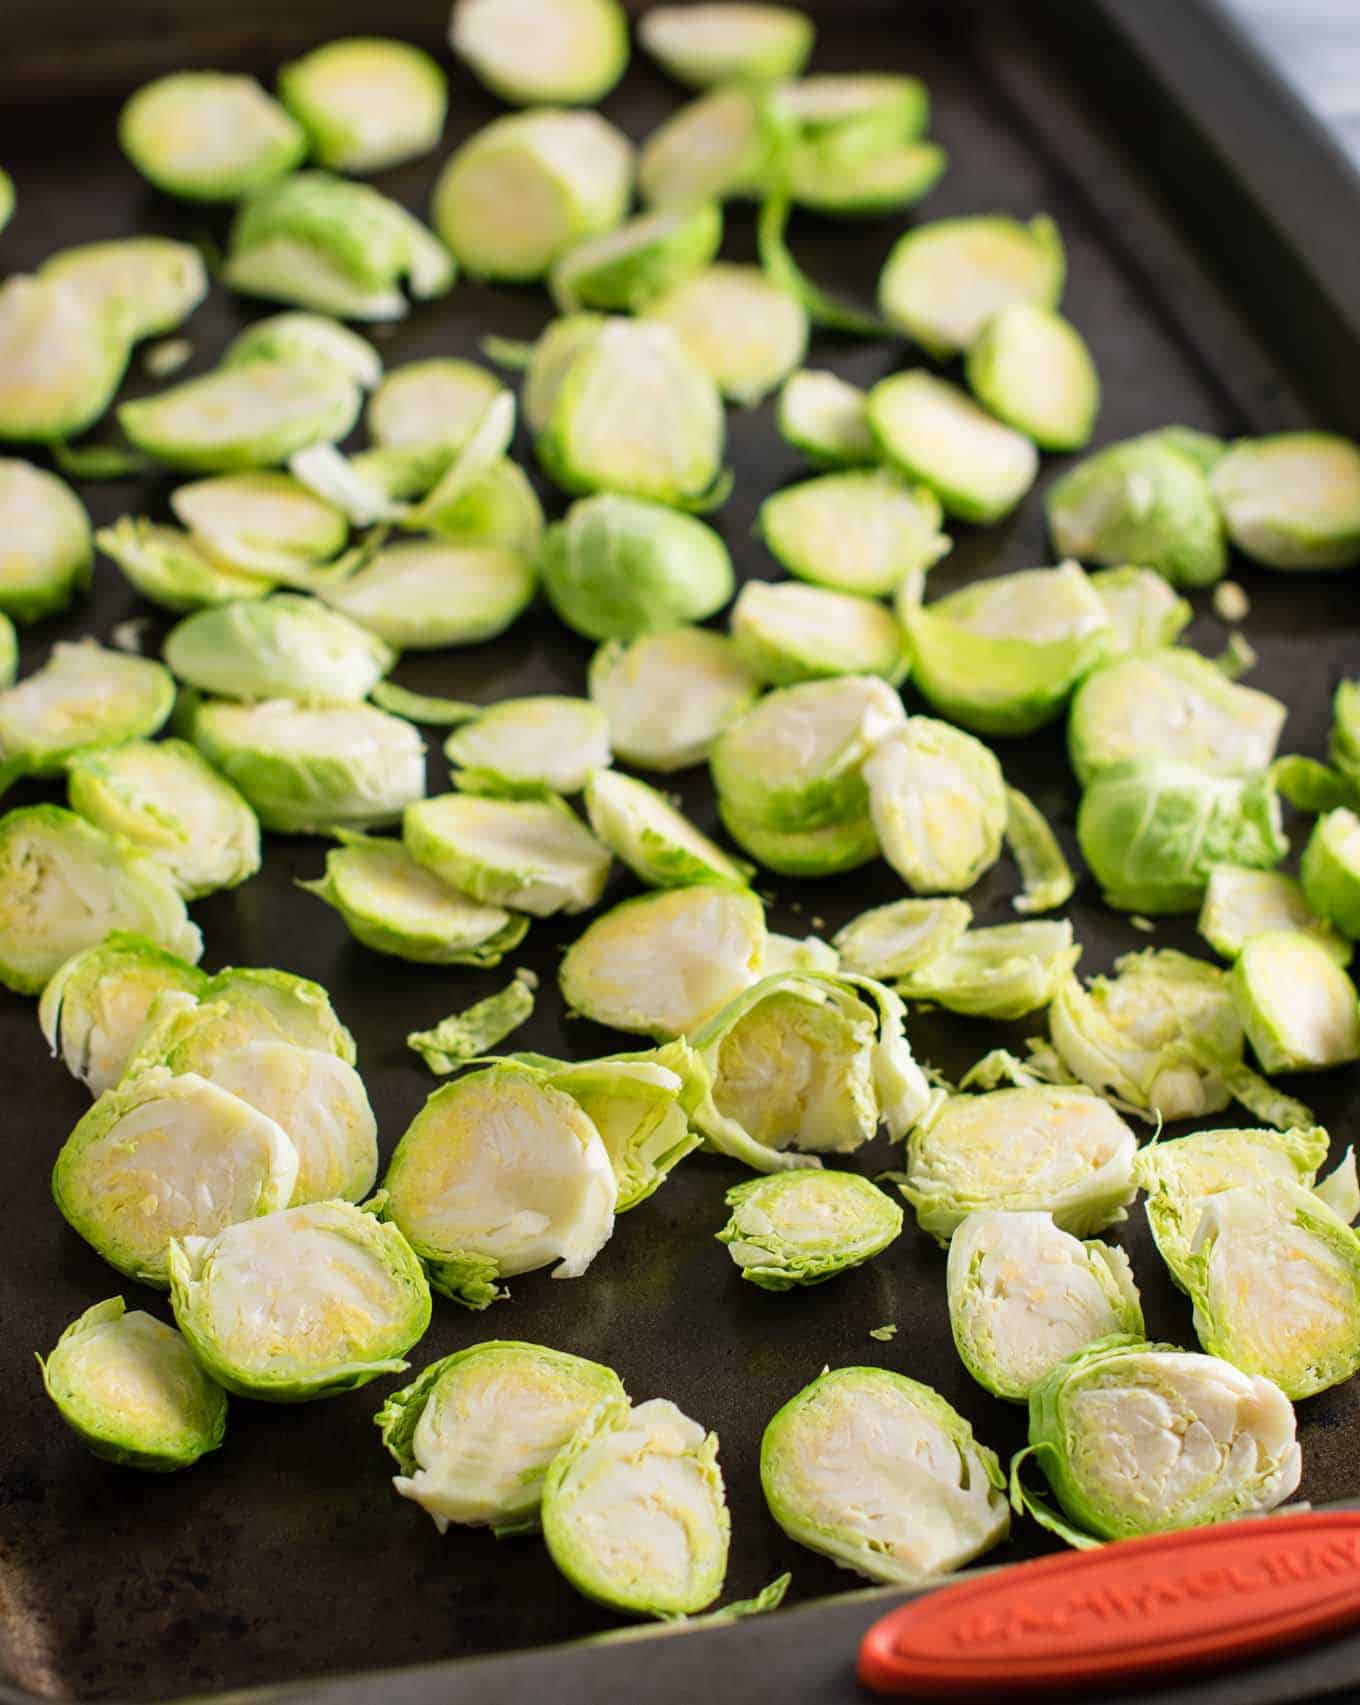 brussels sprouts chips - these are so good I could eat the whole pan myself! #brusselsprouts #brusselsproutchips #dinner #sidedish #vegetarian